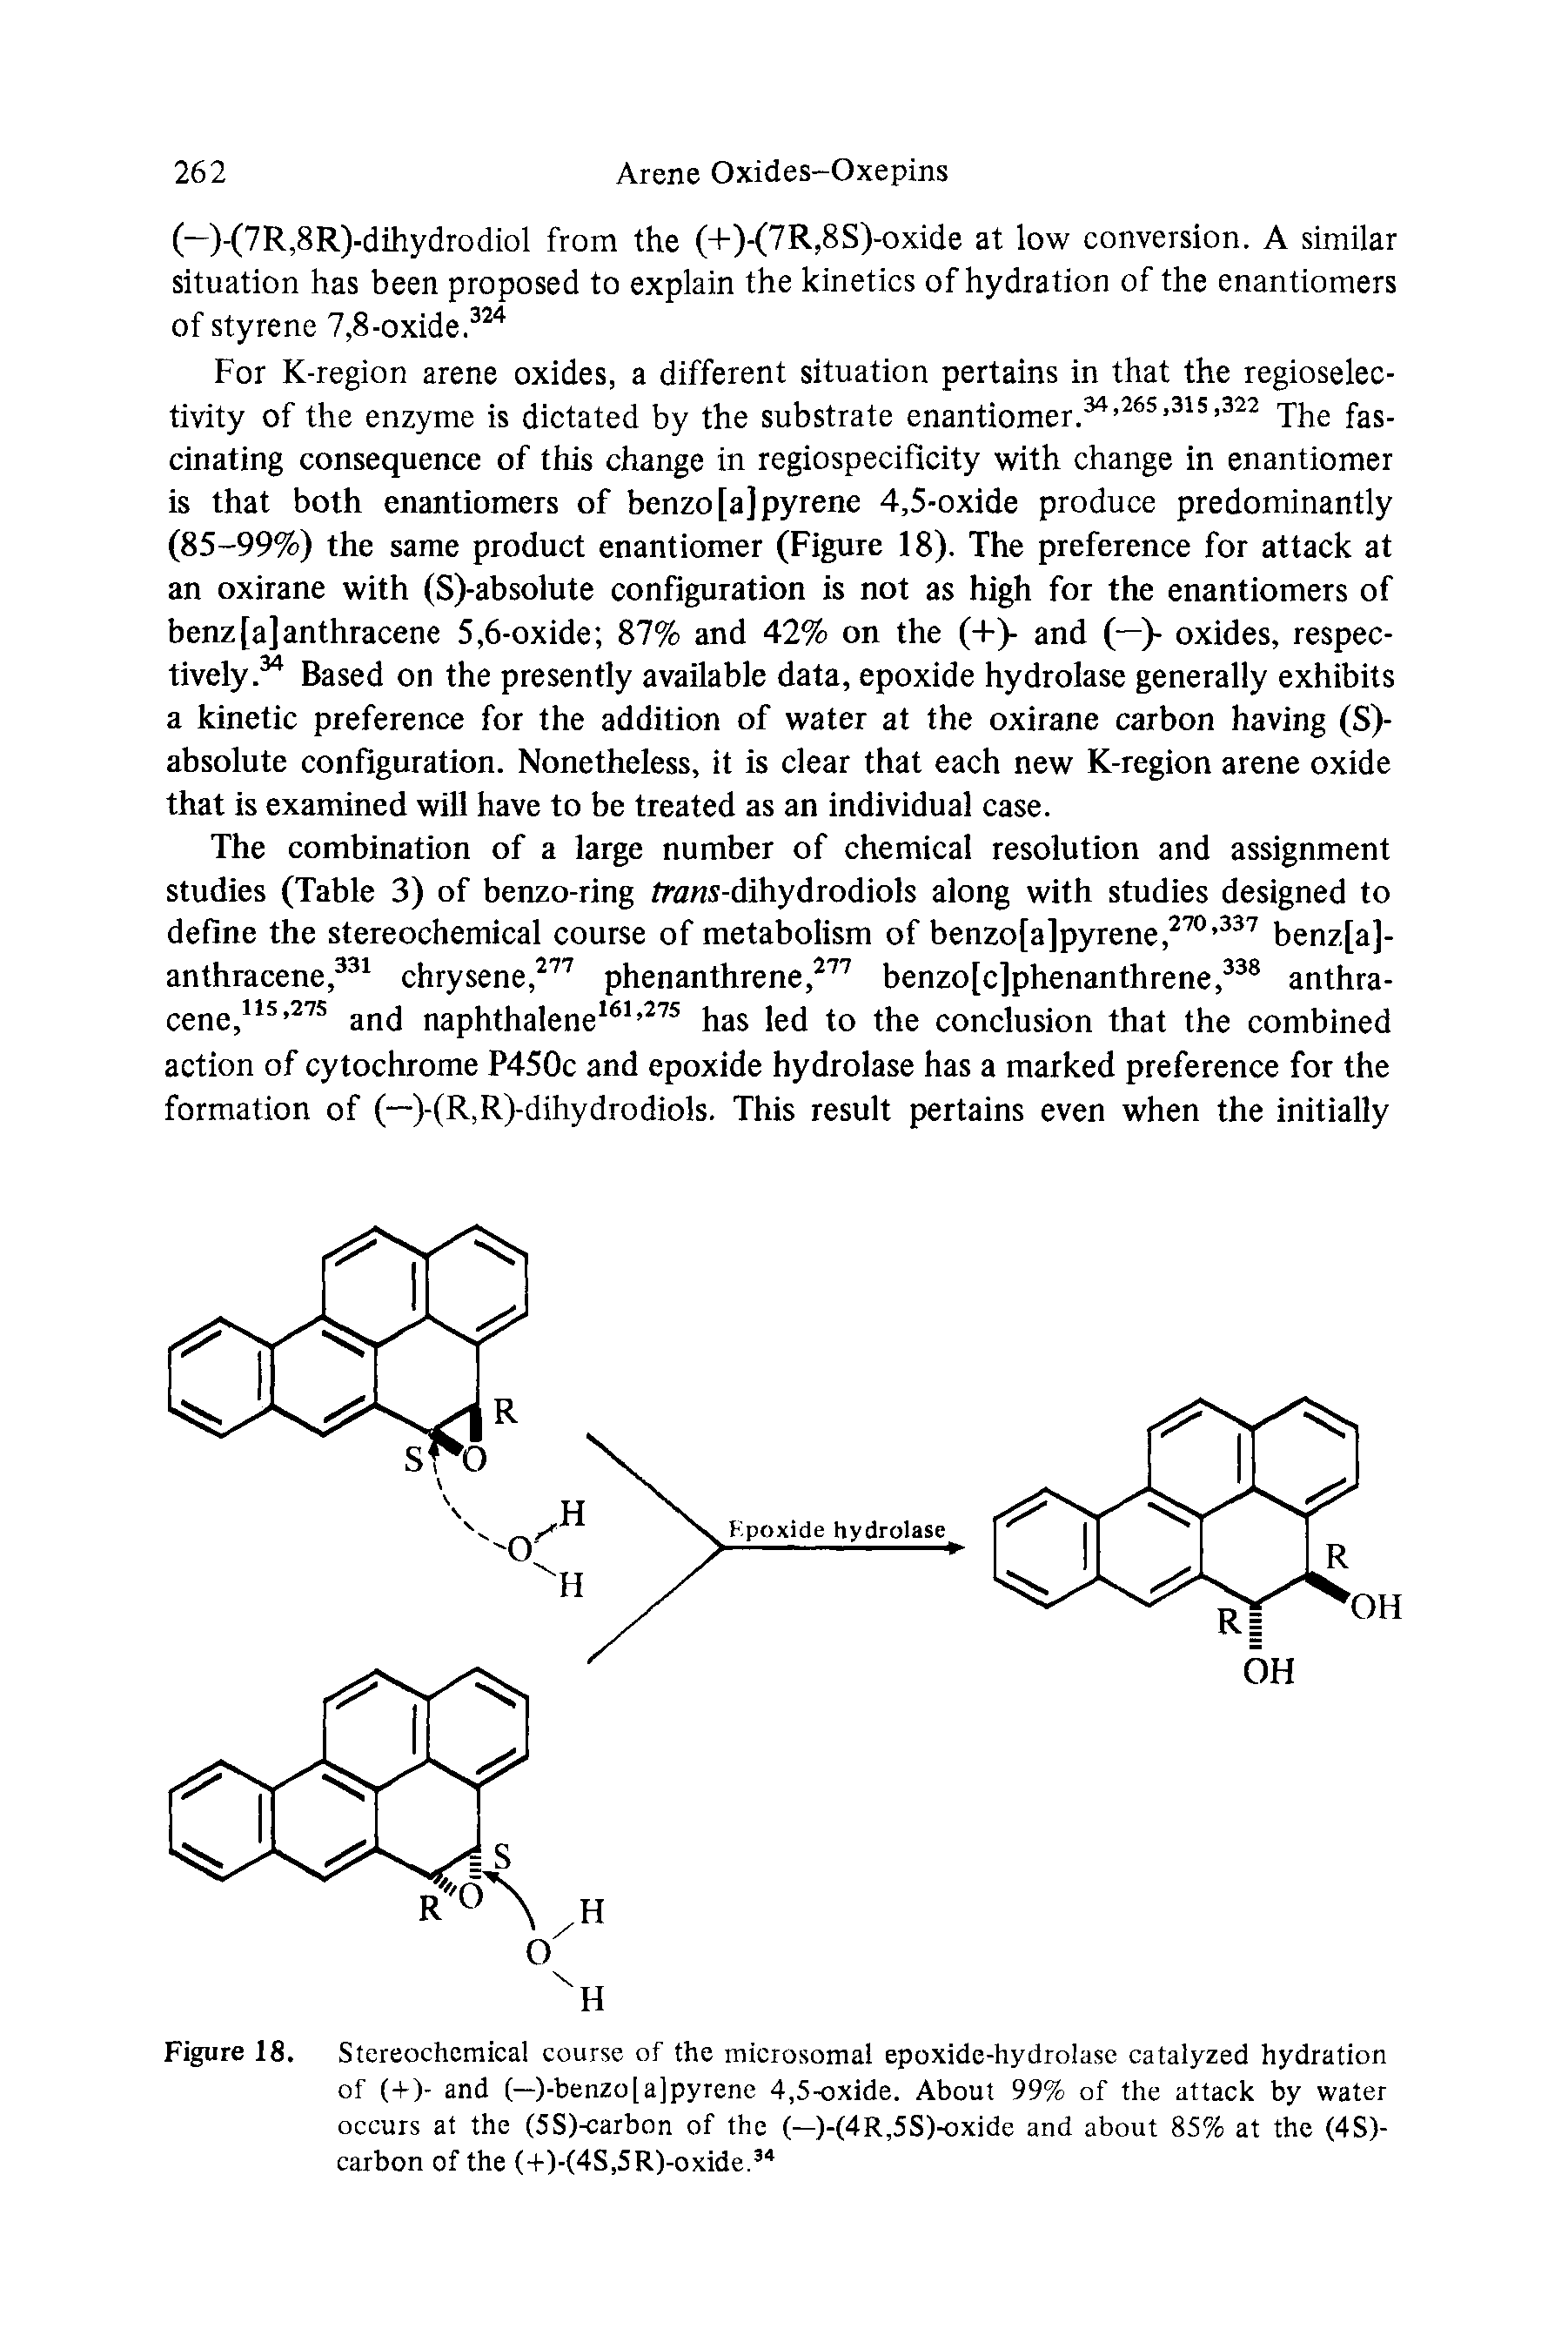 Figure 18. Stereochemical course of the microsomal epoxide-hydrolase catalyzed hydration of (-) )- and (—)-benzo[a]pyrene 4,5-oxide. About 99% of the attack by water occurs at the (5S)-carbon of the (—)-(4R,5S)-oxide and about 85% at the (4S)-carbon of the (-l-)-(4S,5R)-oxide. ...